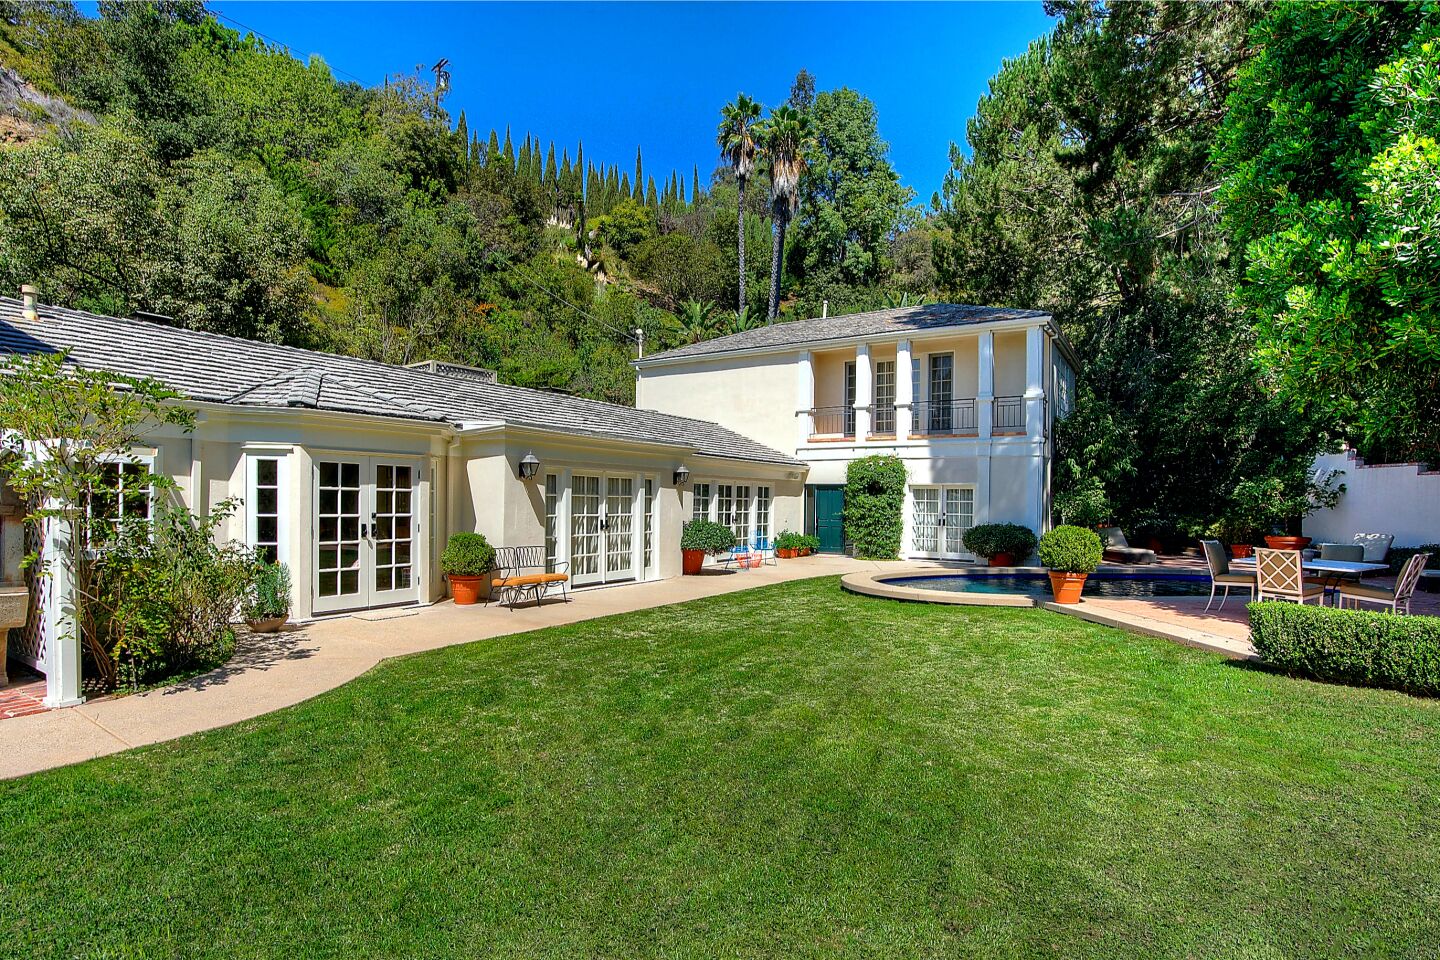 Katy Perry's Beverly Hills home